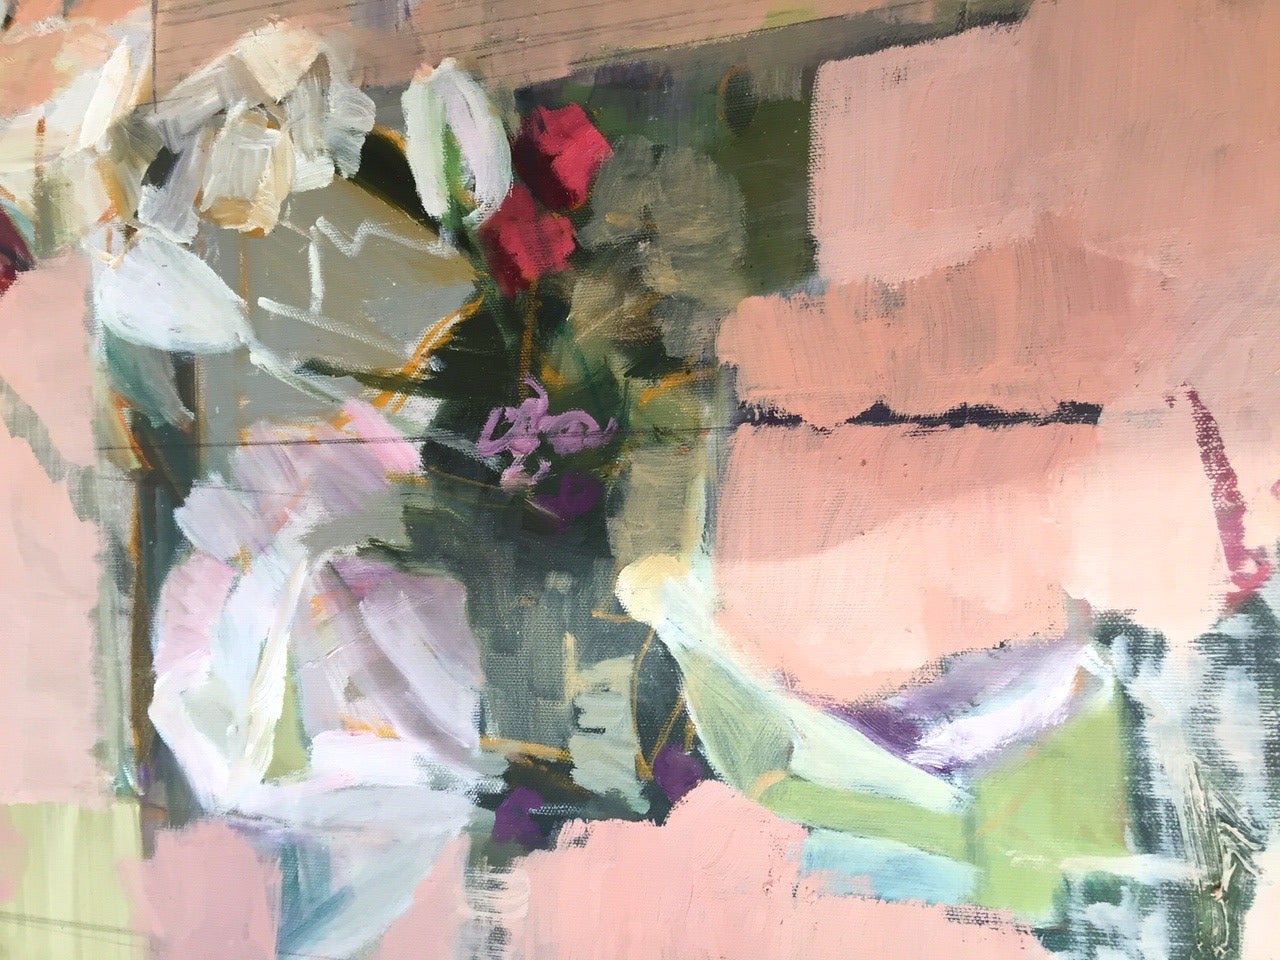 Half abstract half realistic garden, with green and red flowers peeking through peach color wall. 

Christine Averill-Green is a resident of the Capital District and has been exhibiting her artwork in galleries and museums in Upstate New York for